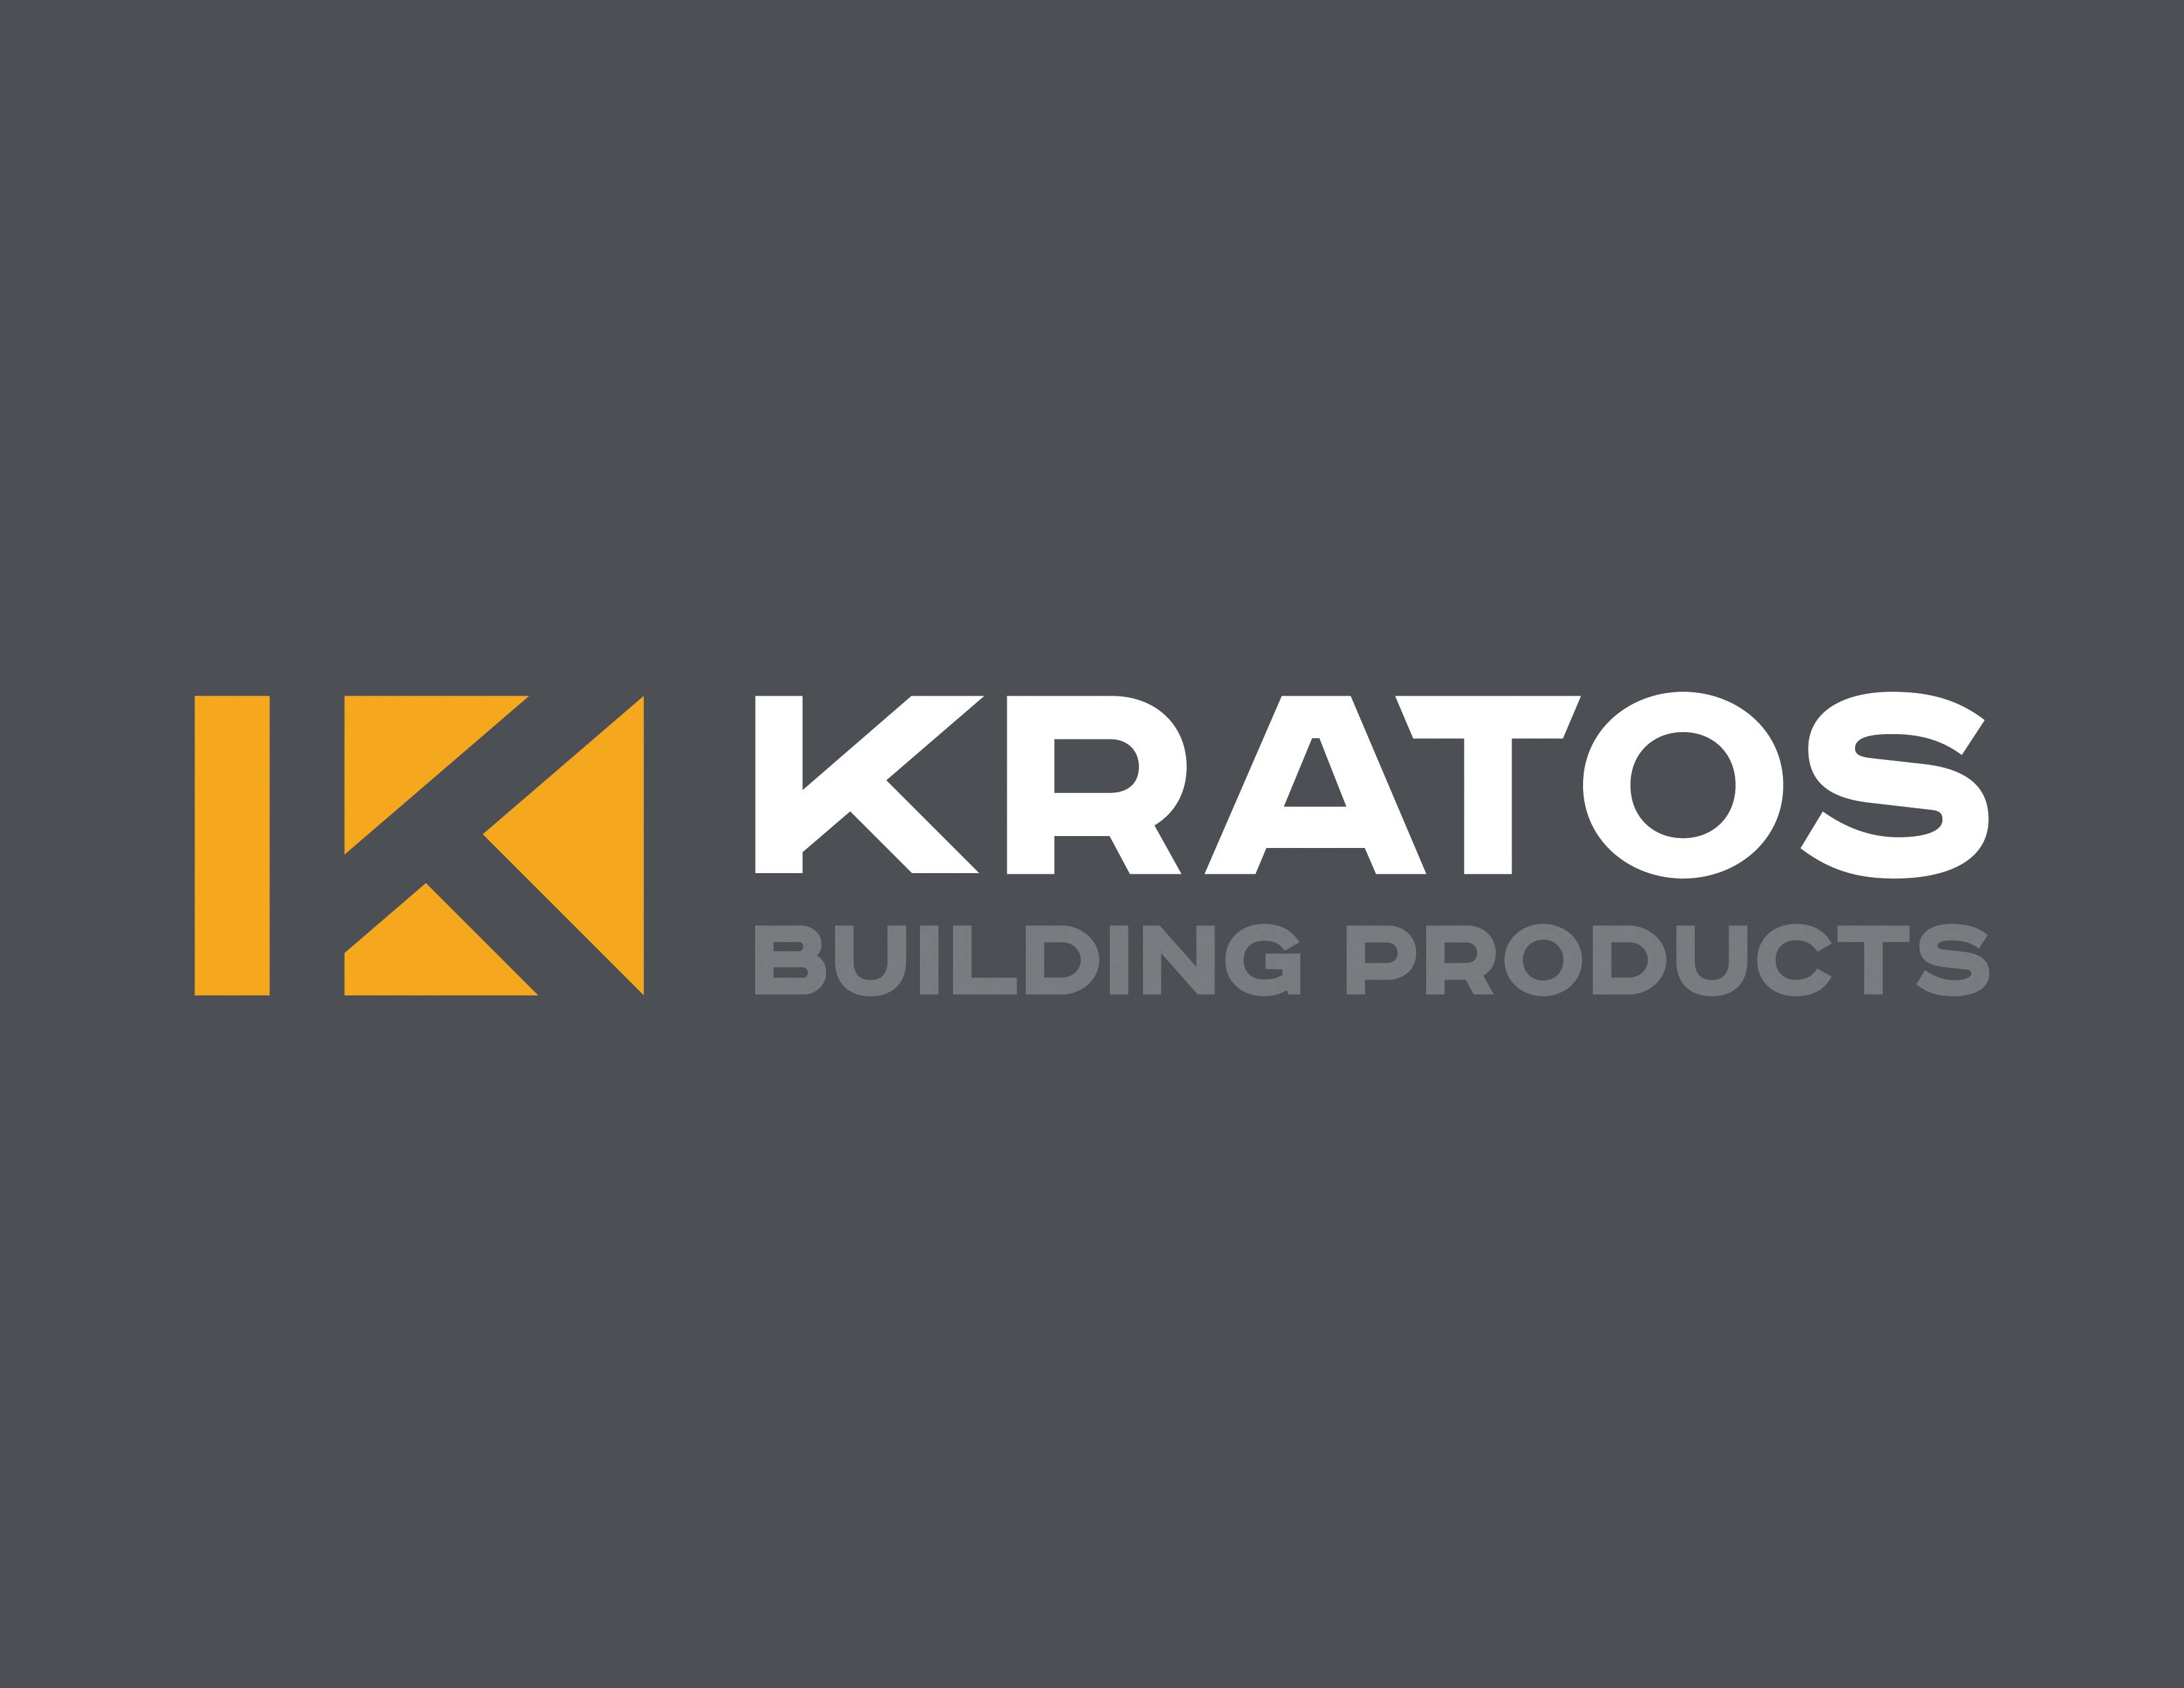  K KRATOS BUILDING PRODUCTS